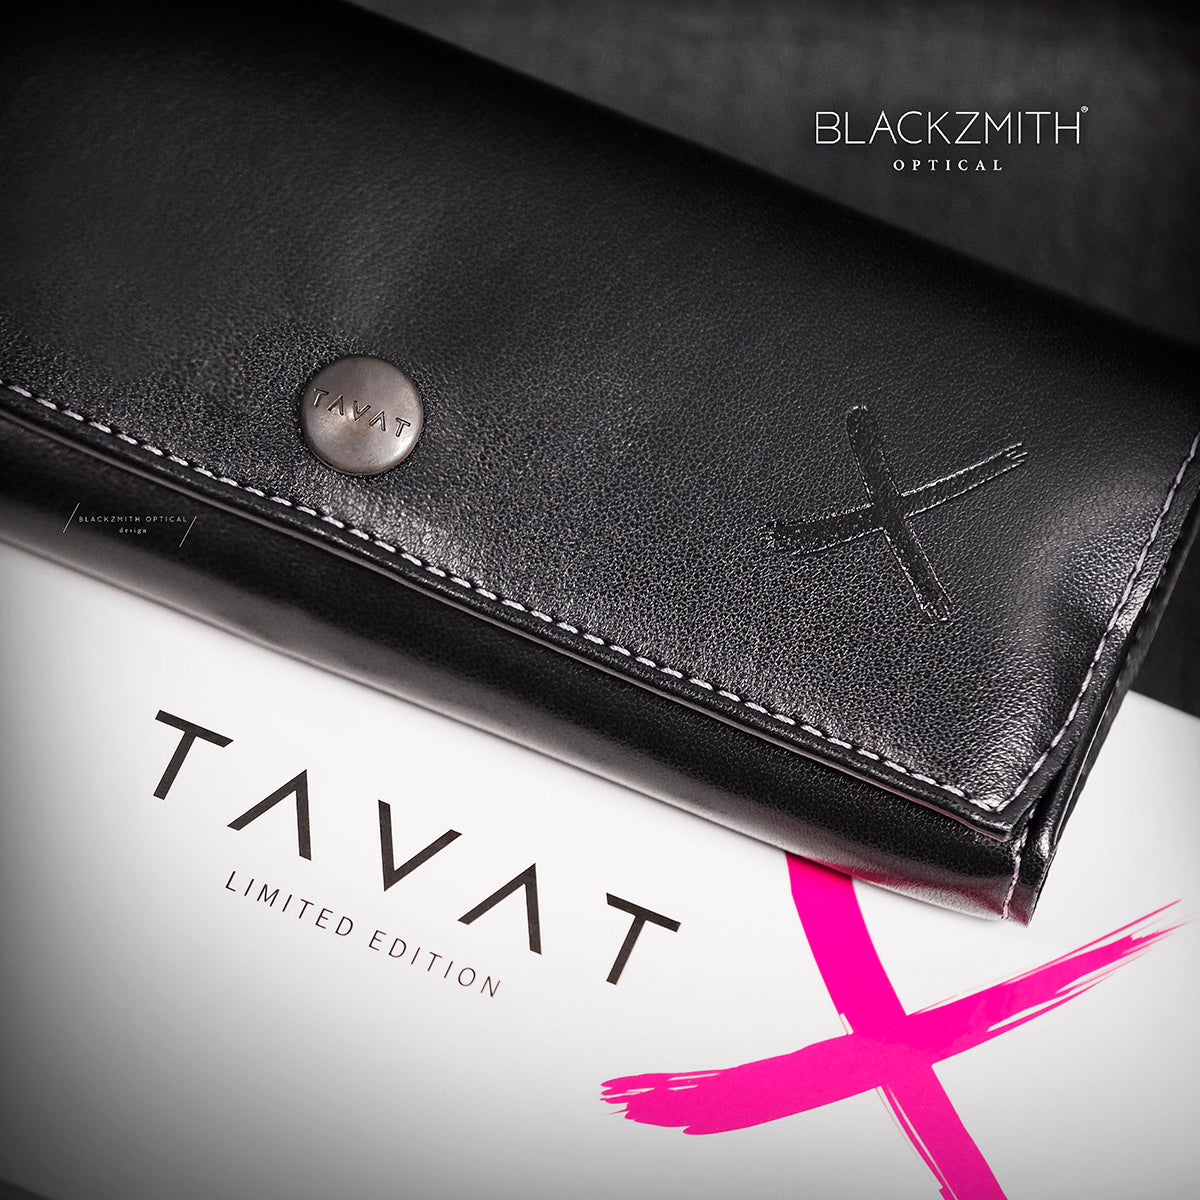 Tavat - Pantos C 2.0 X - LS007 LIB -Special Limited Edition - Sold Out